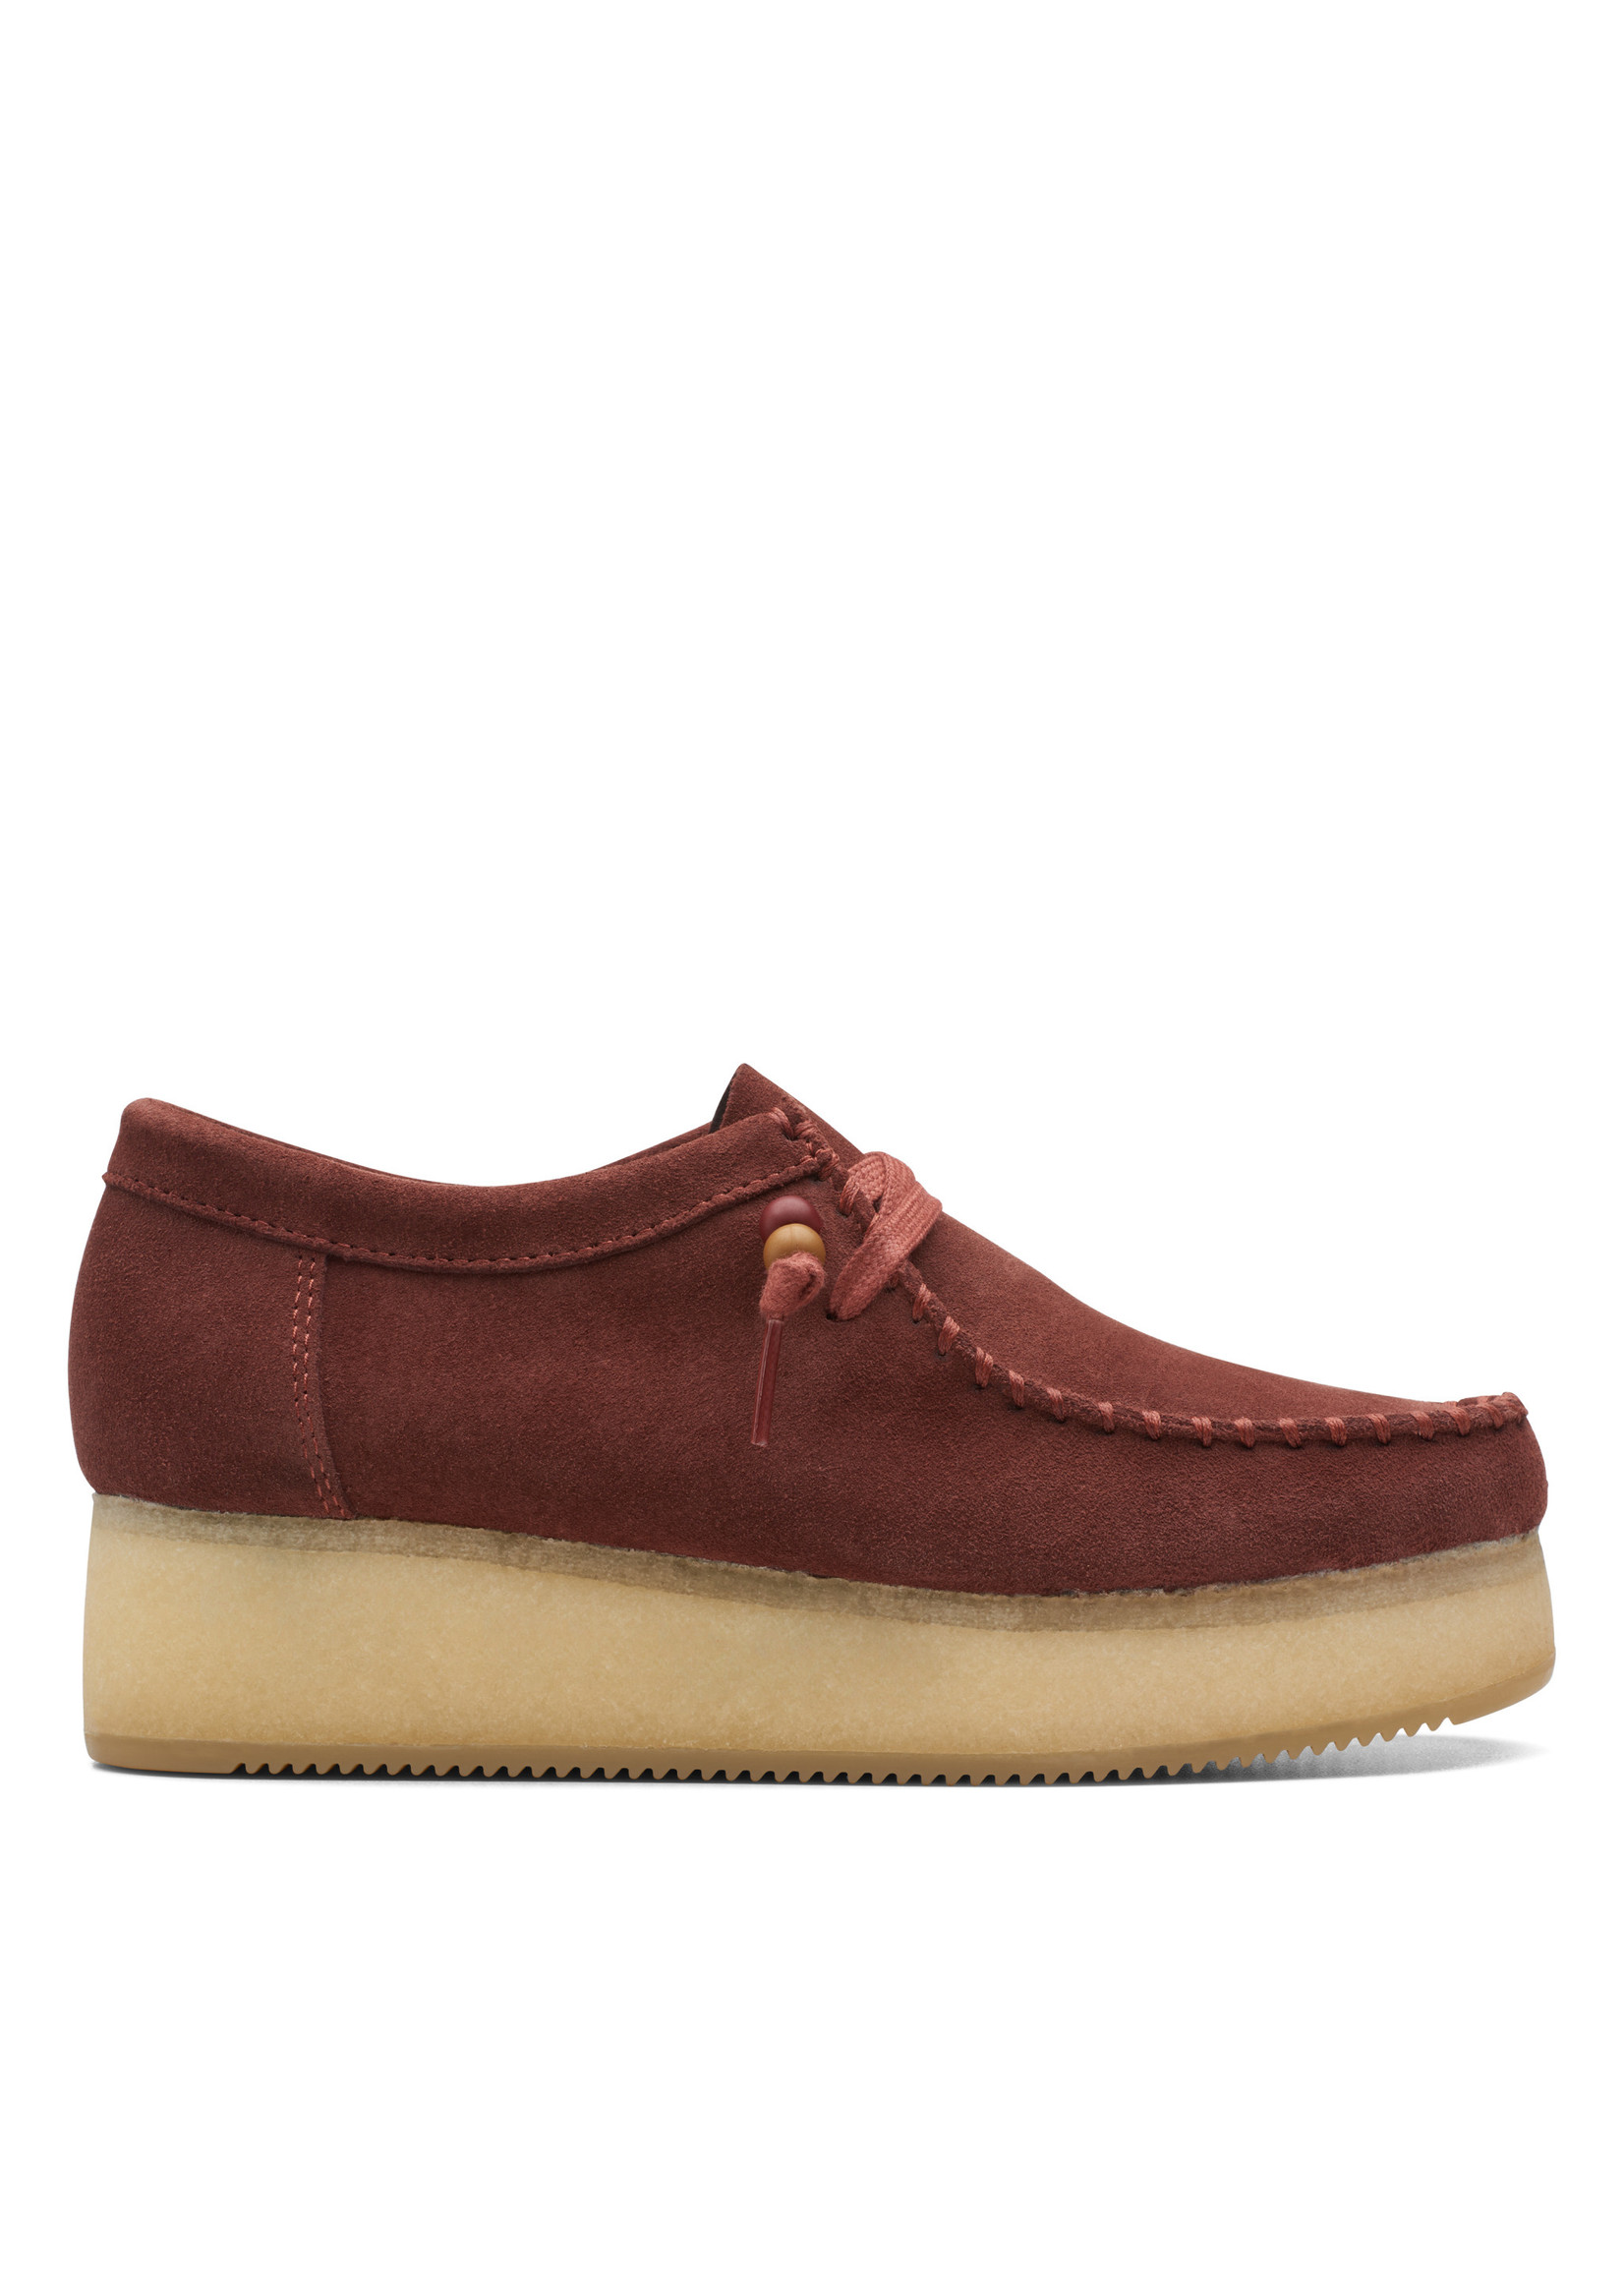 Womens Wallacraft Lo Burgundy Suede Red | 26168747 - SHOE PLUS